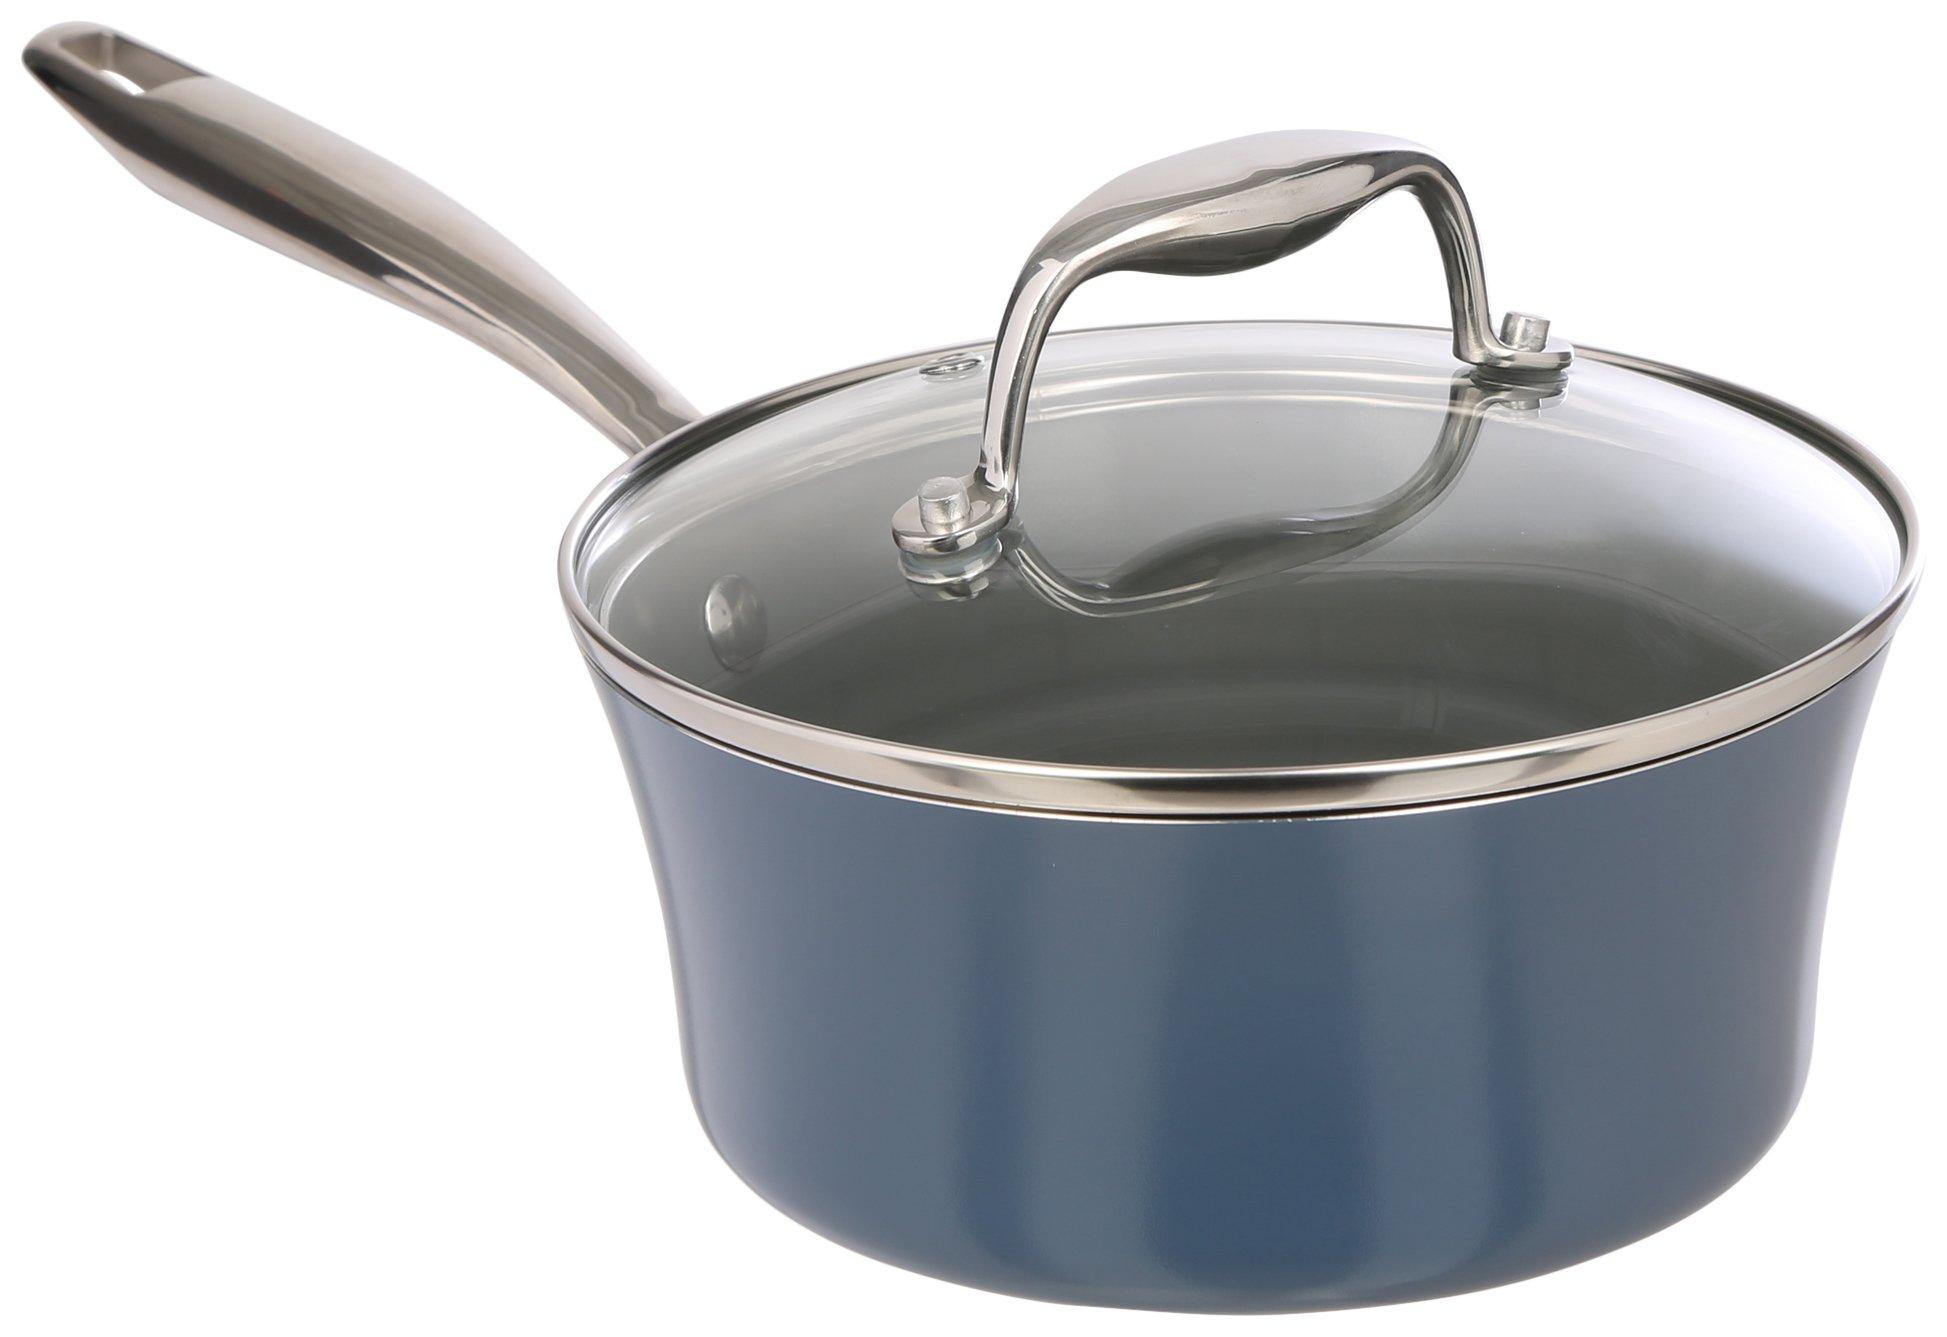 Zest Kitchen and Home Ceramic Non-Stick Sauce Pan with Lid - Blue - 2 qt